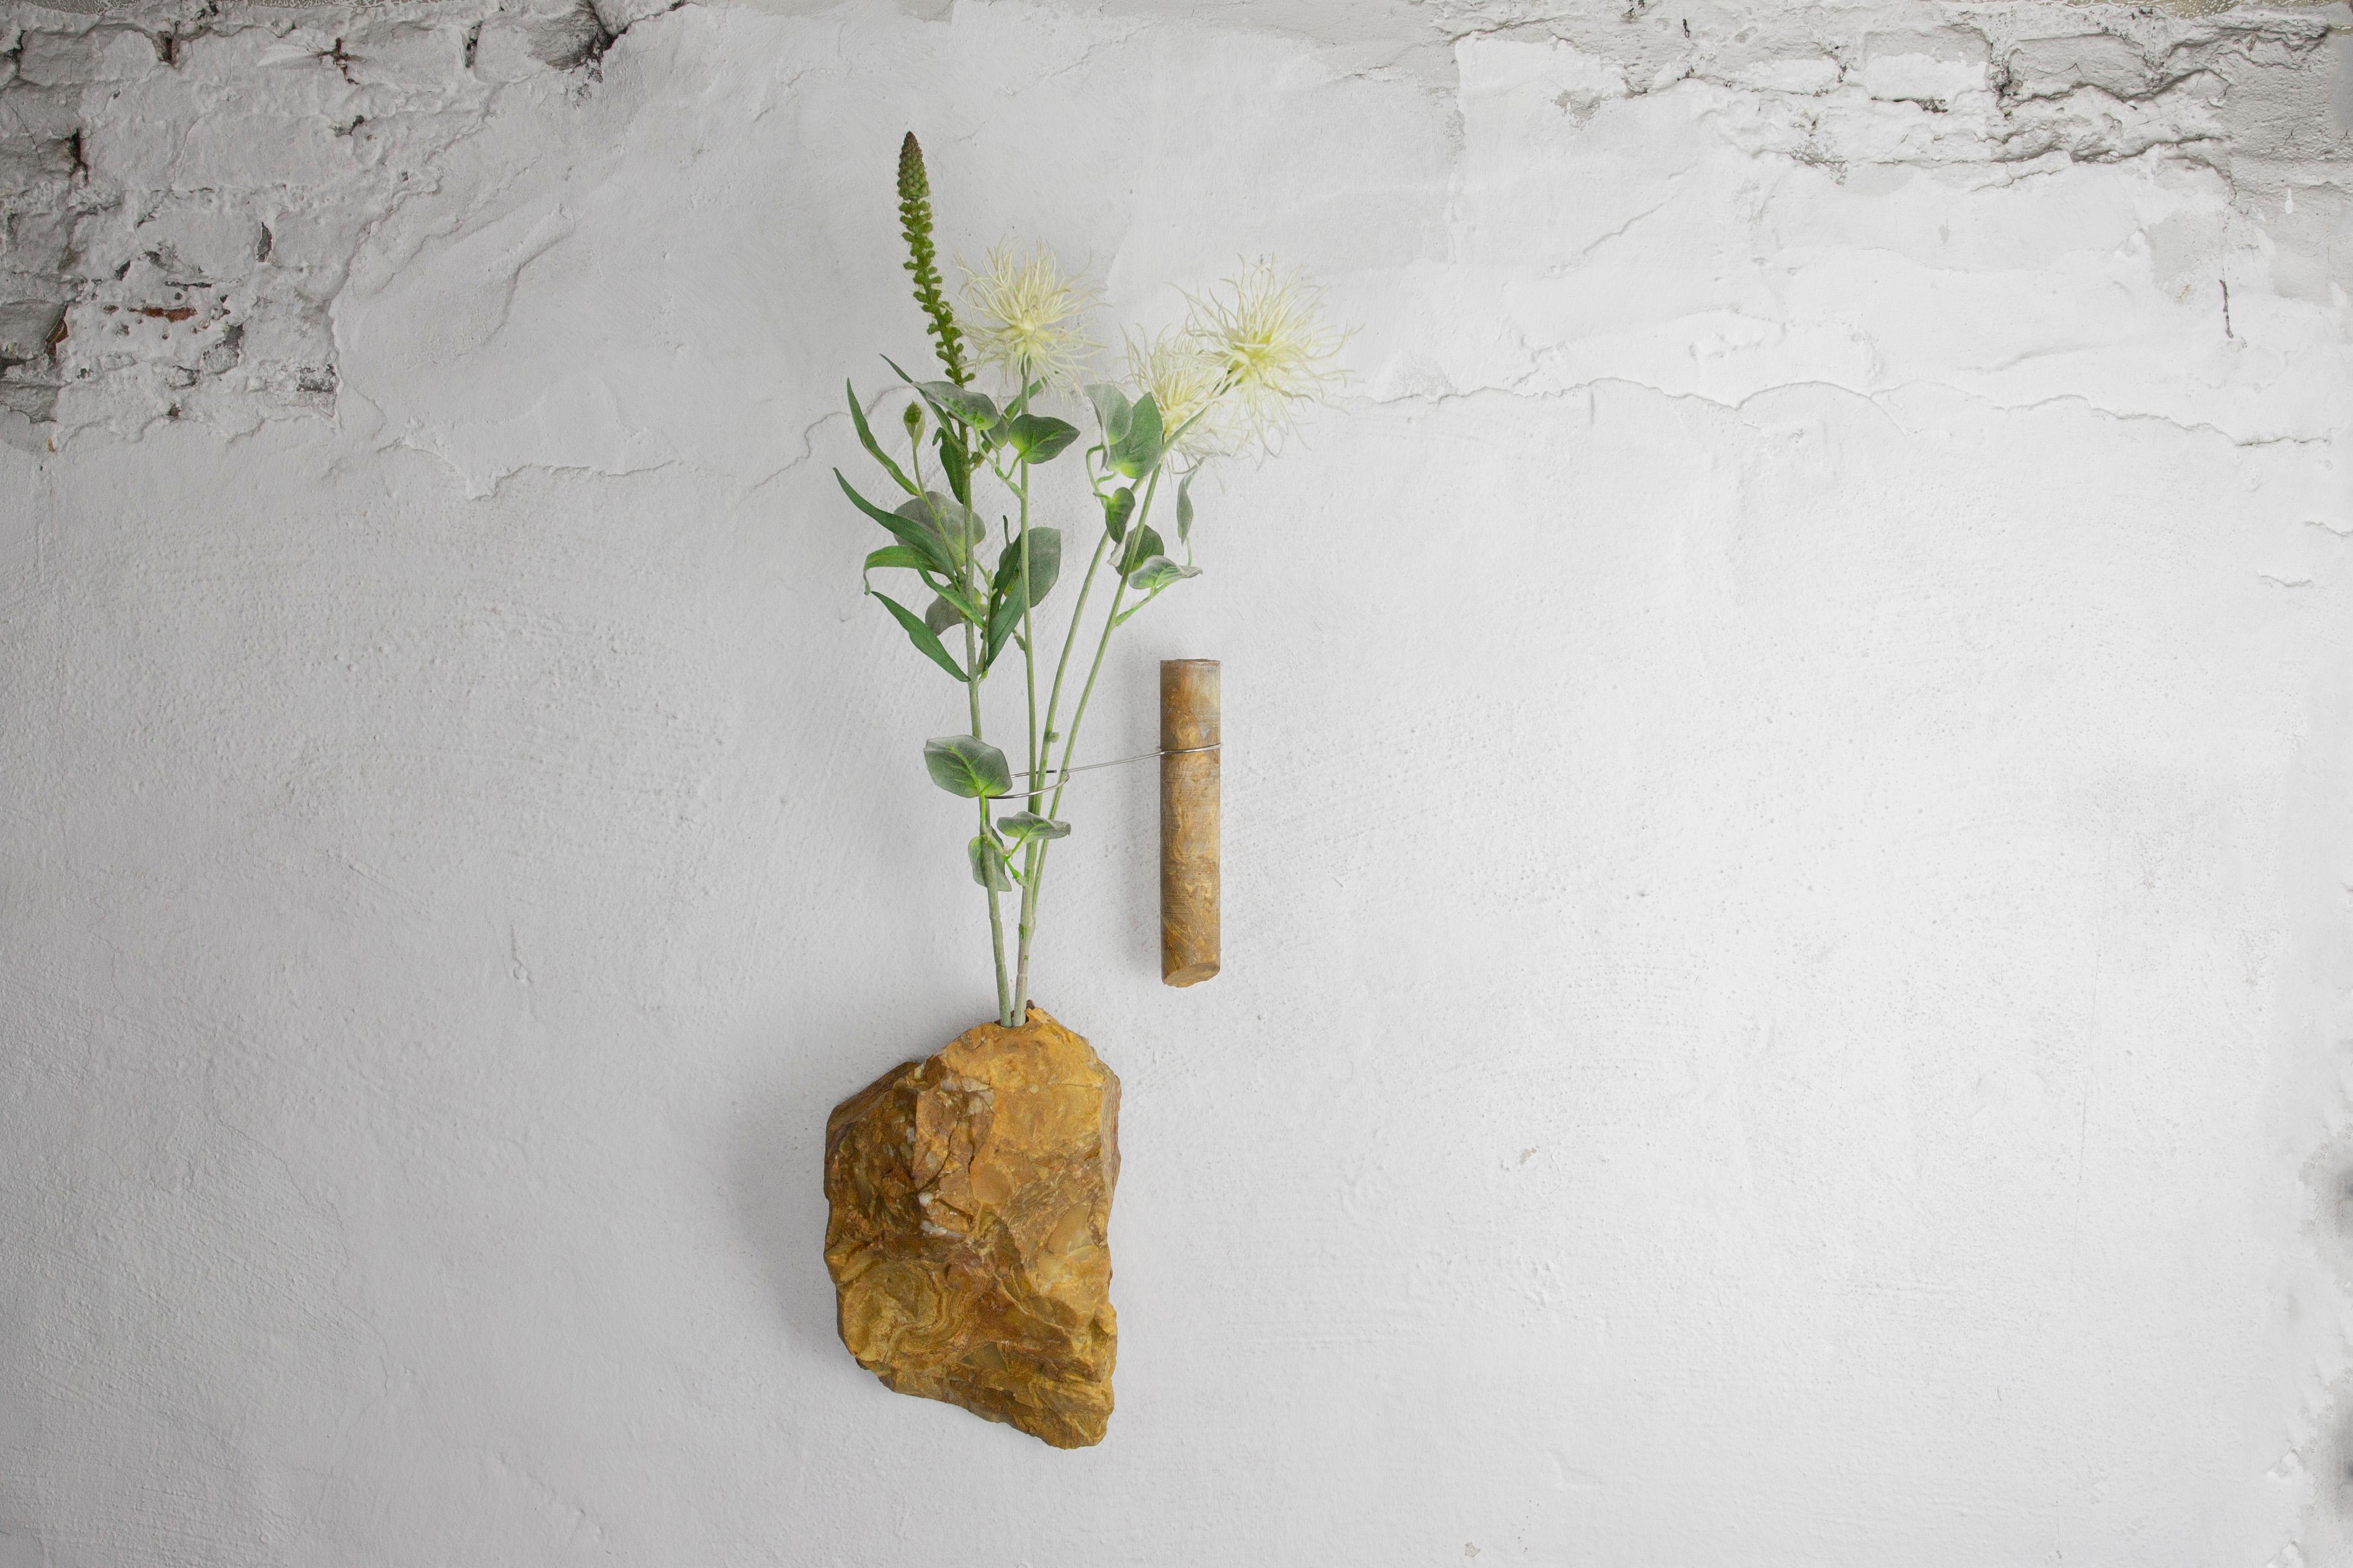 Yellow Jasper Flower Wall Vessel by Studio DO
Dimensions: D 30 x W 16 x H 15.5 cm
Materials: Yellow Jasper, stainless steel.
7.5 kg.

Flowers are intrinsically connected with composition and earth.
Influenced by varied vessels from past to present